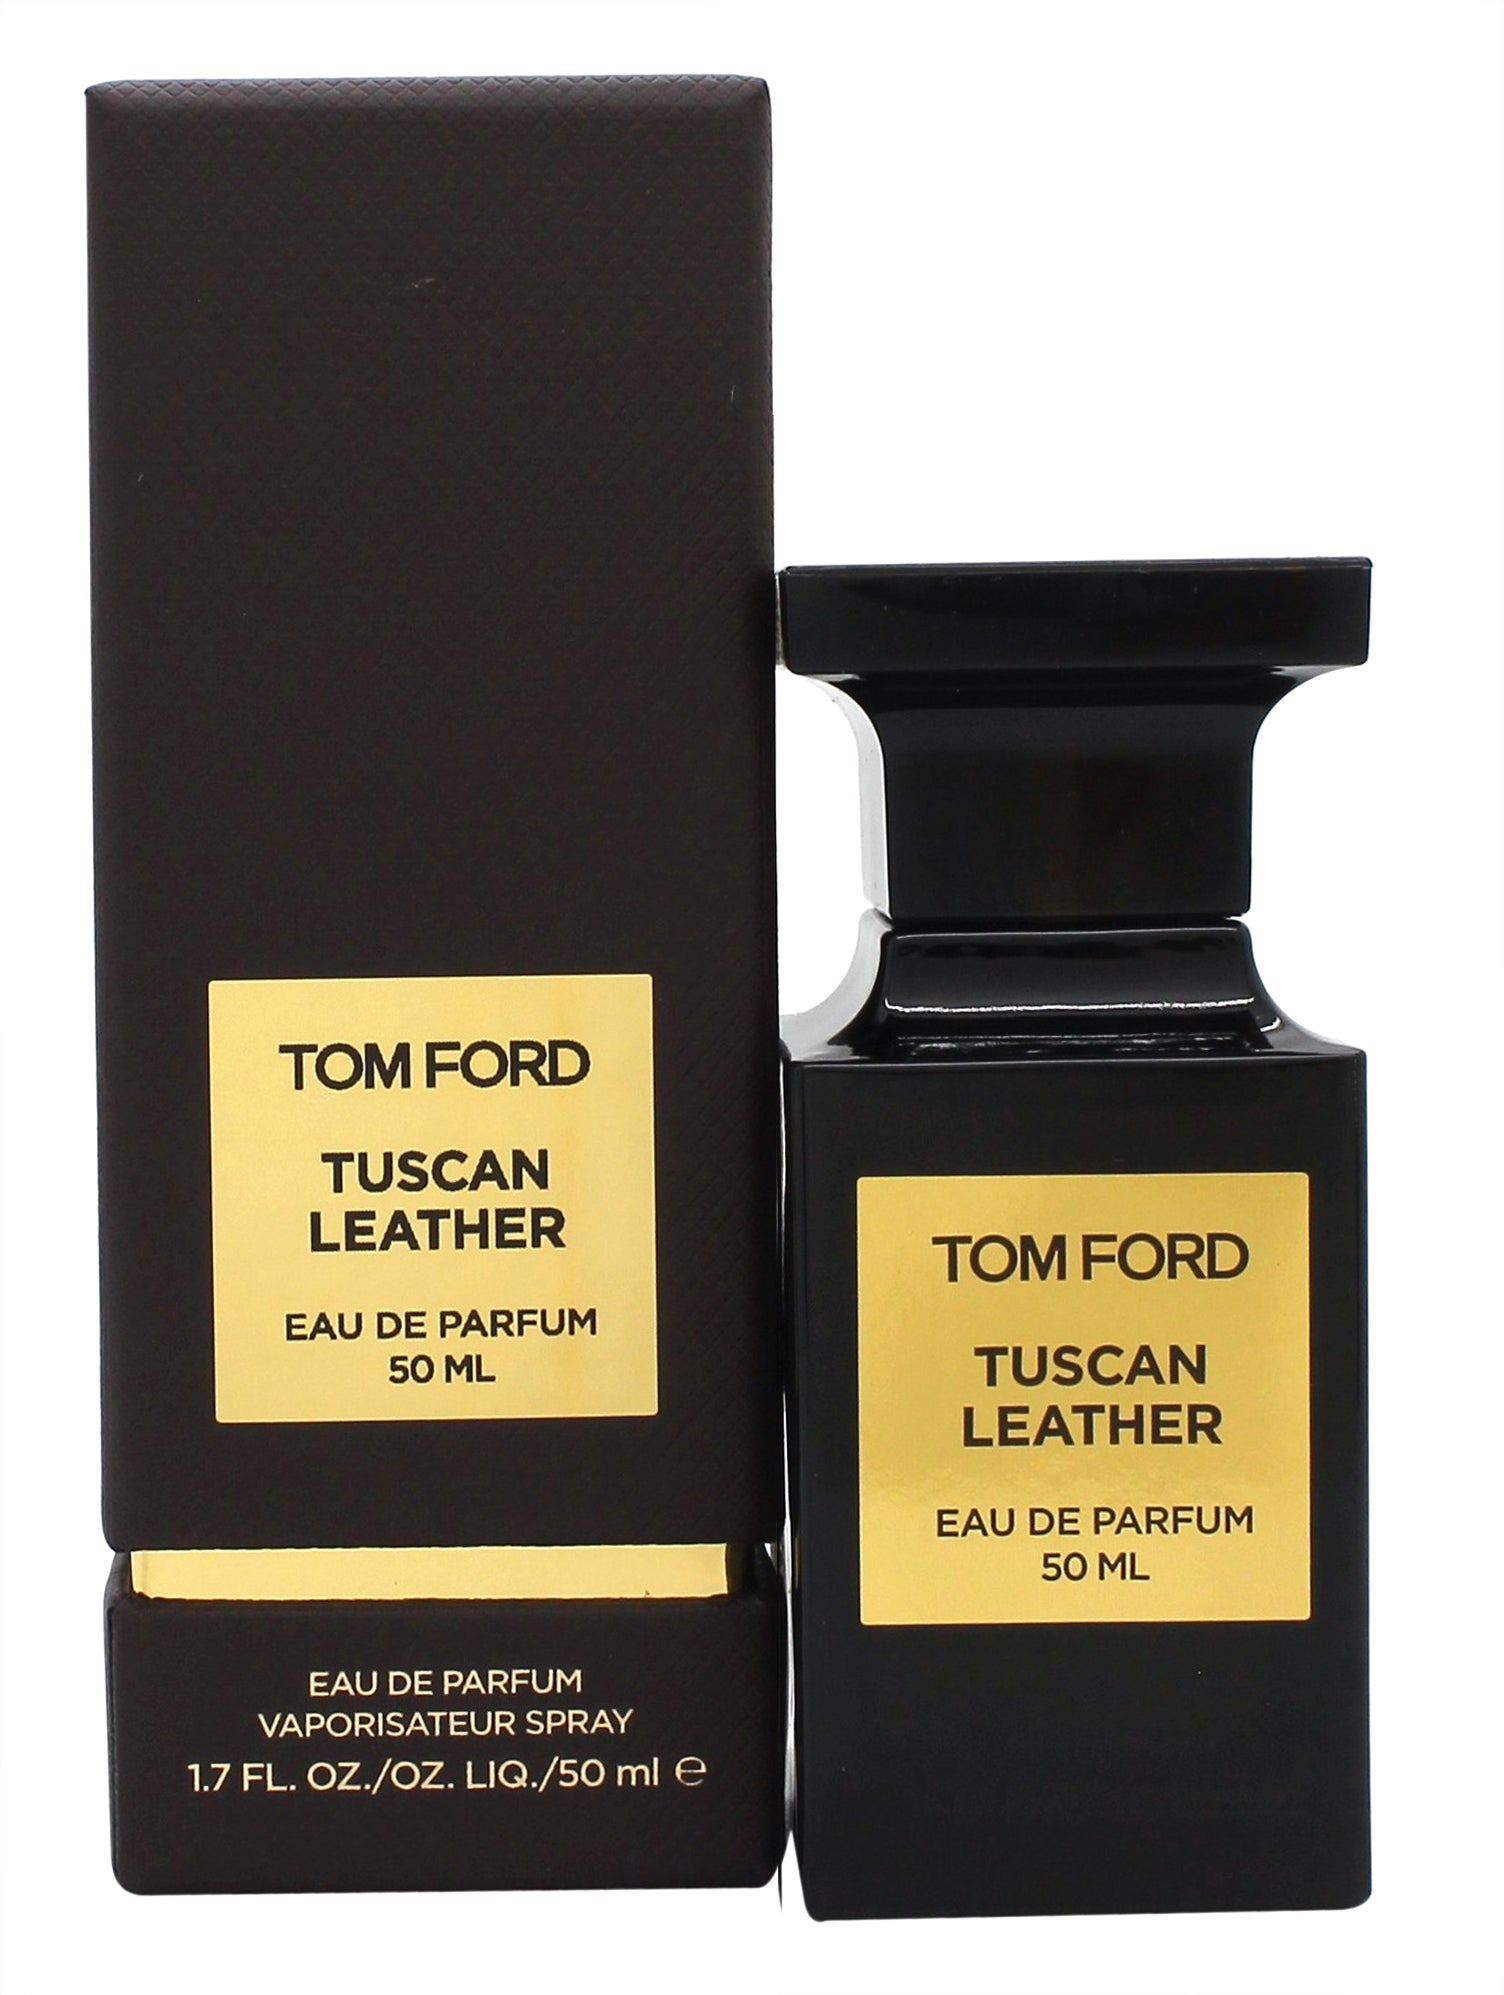 View Tom Ford Private Blend Tuscan Leather Eau de Parfum 50ml Spray information